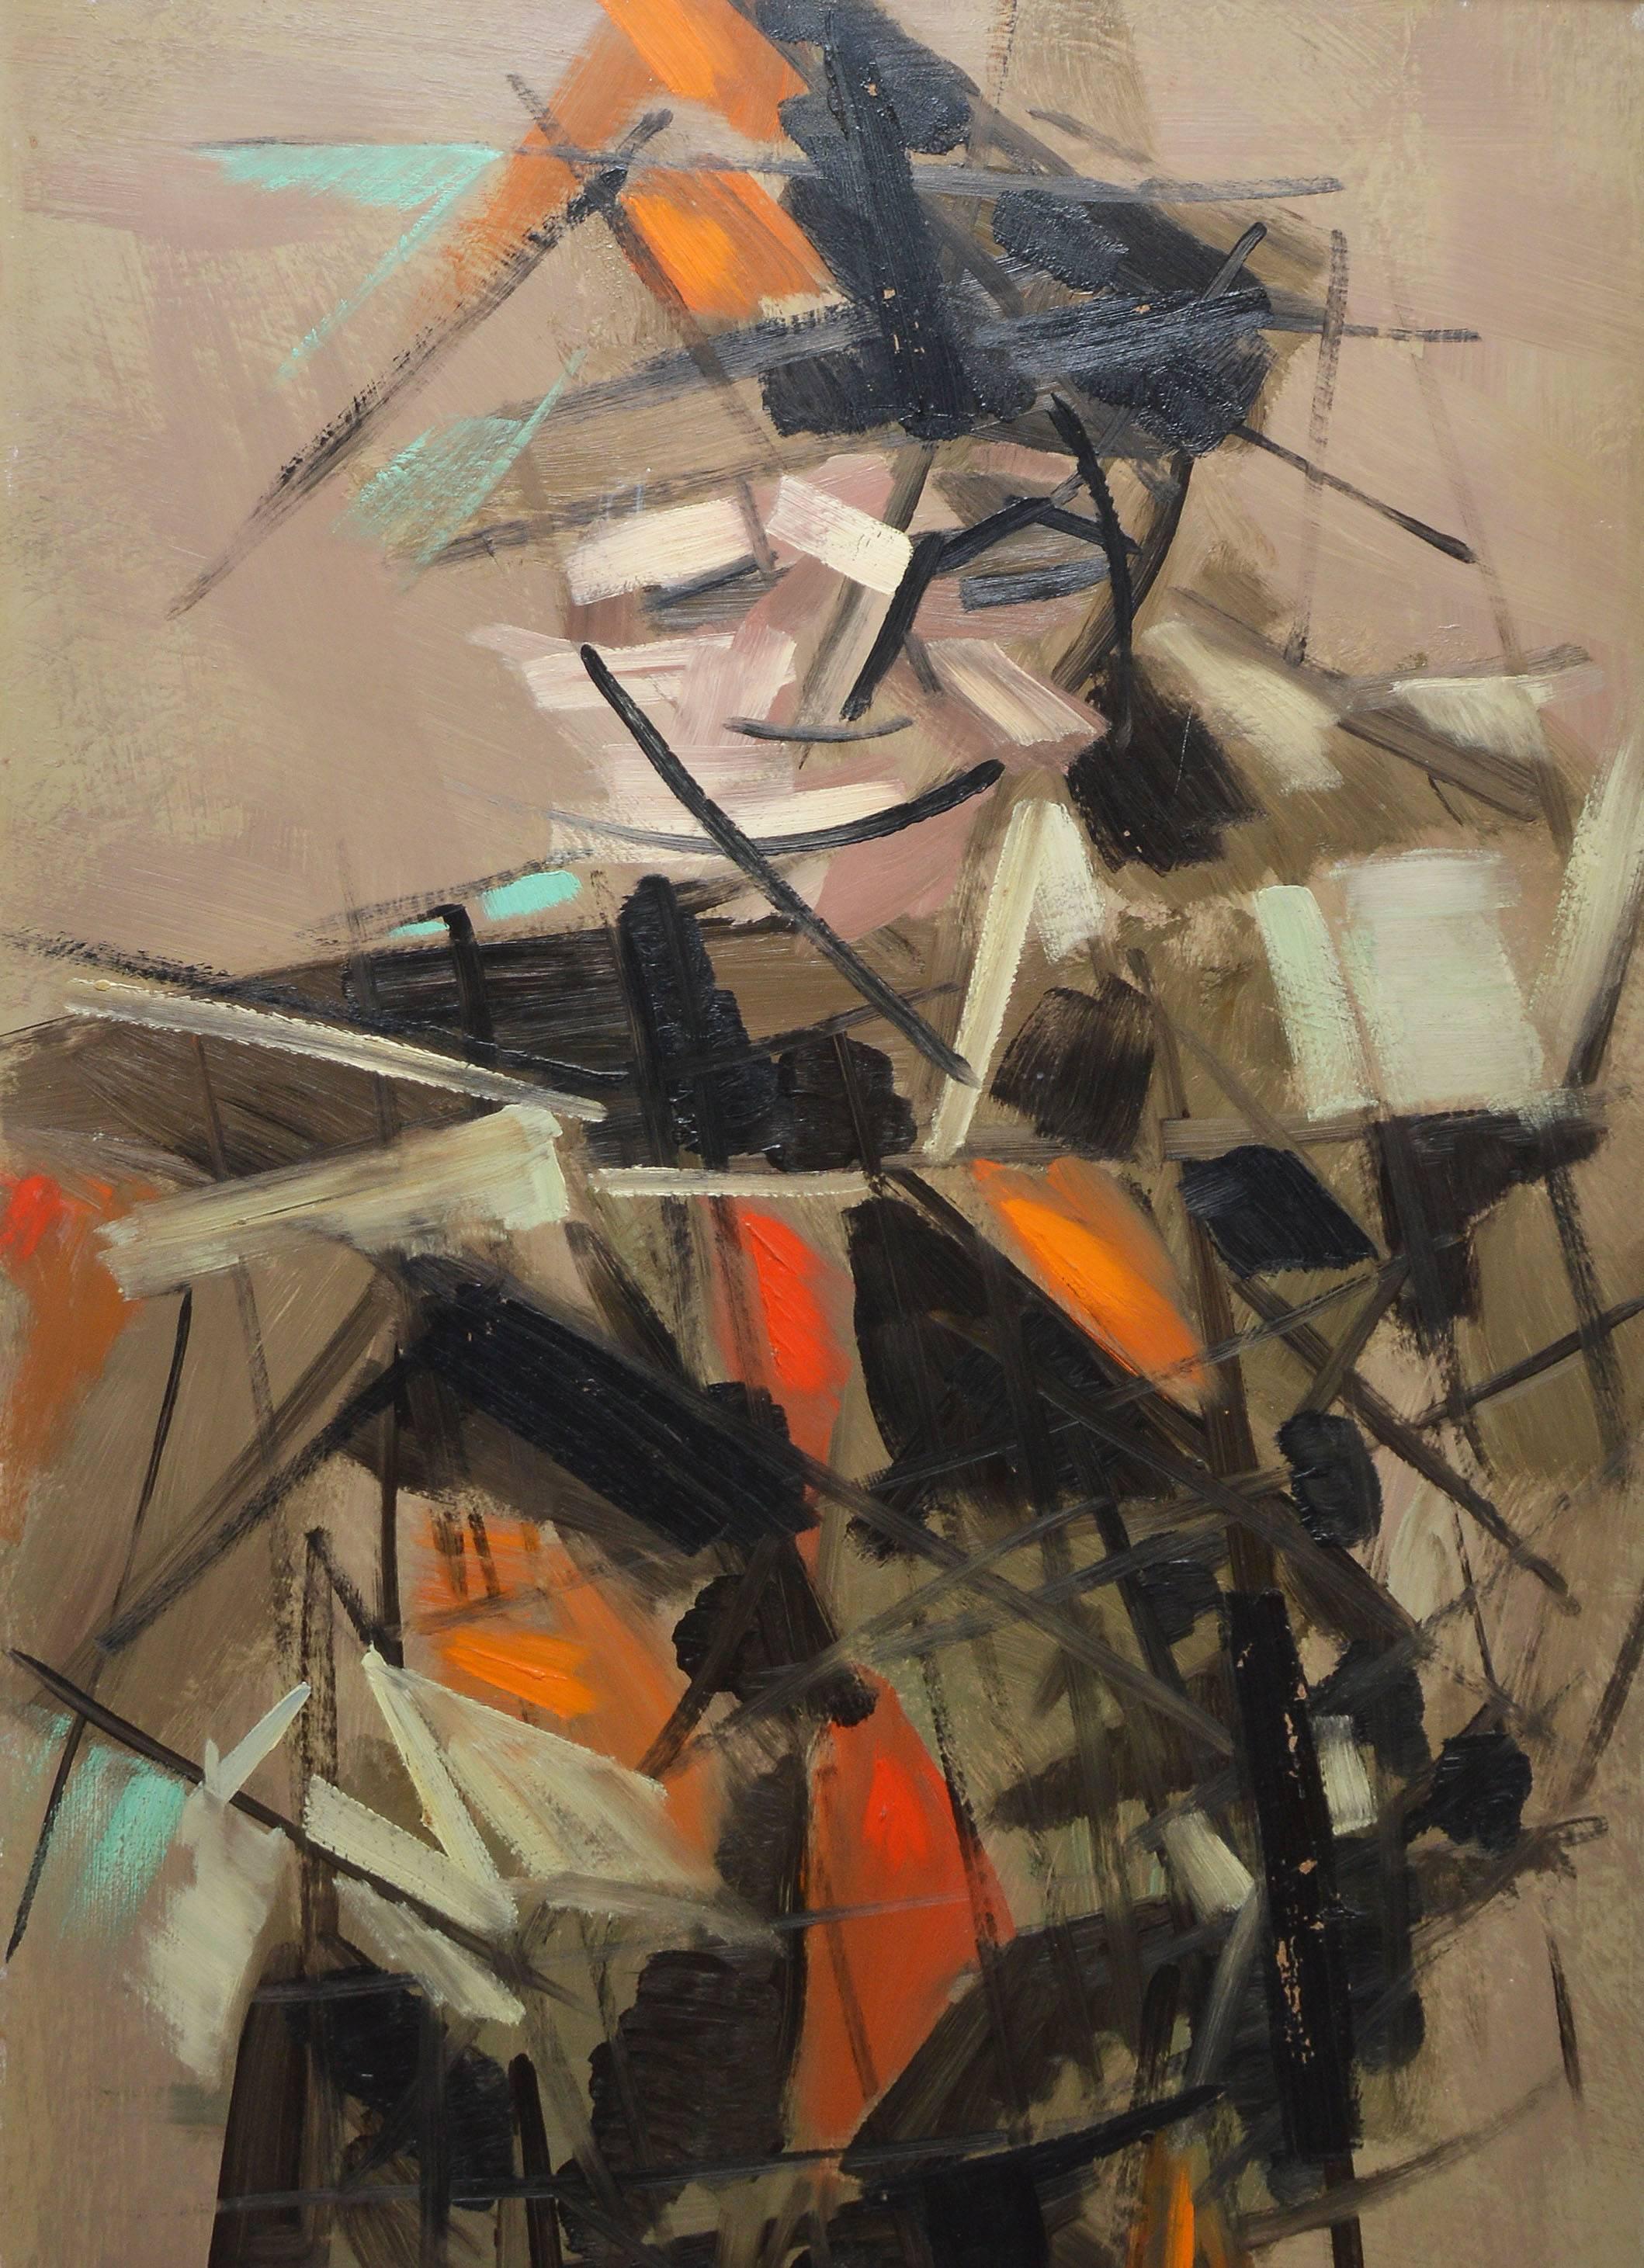 Cubist abstracted figure by Kasan.  Oil on board, circa 1950.  Displayed in a whitewood frame.  Image size, 18